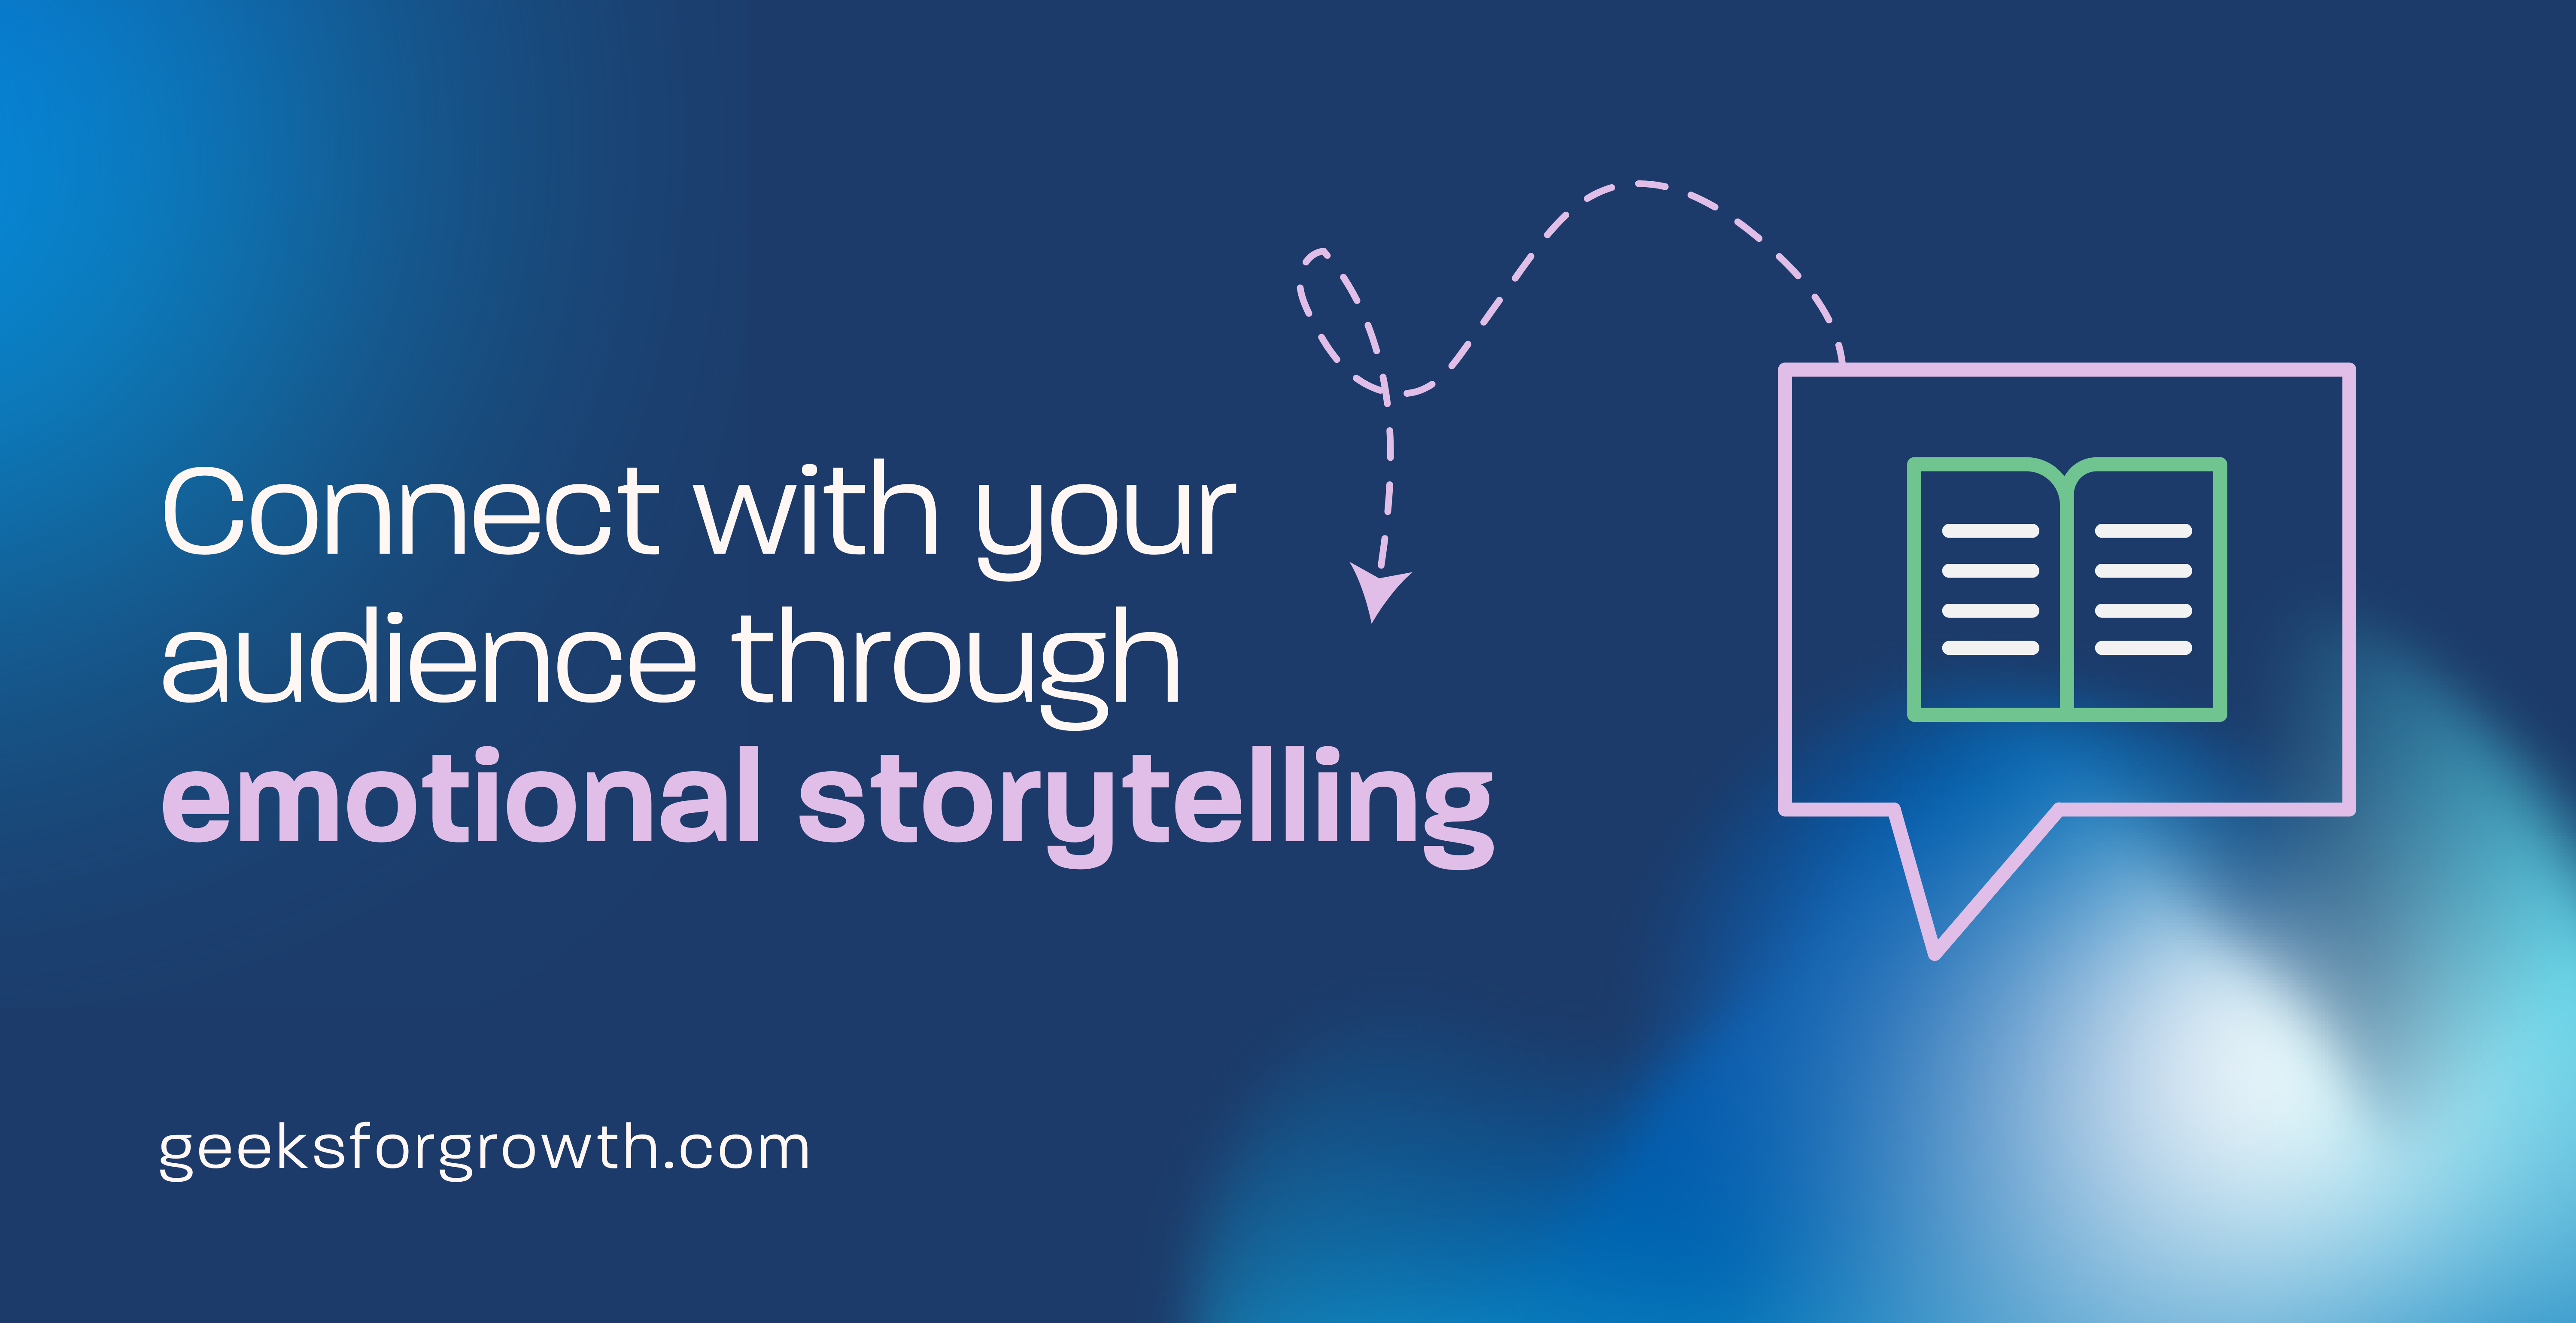 Connect with your audience through emotional storytelling